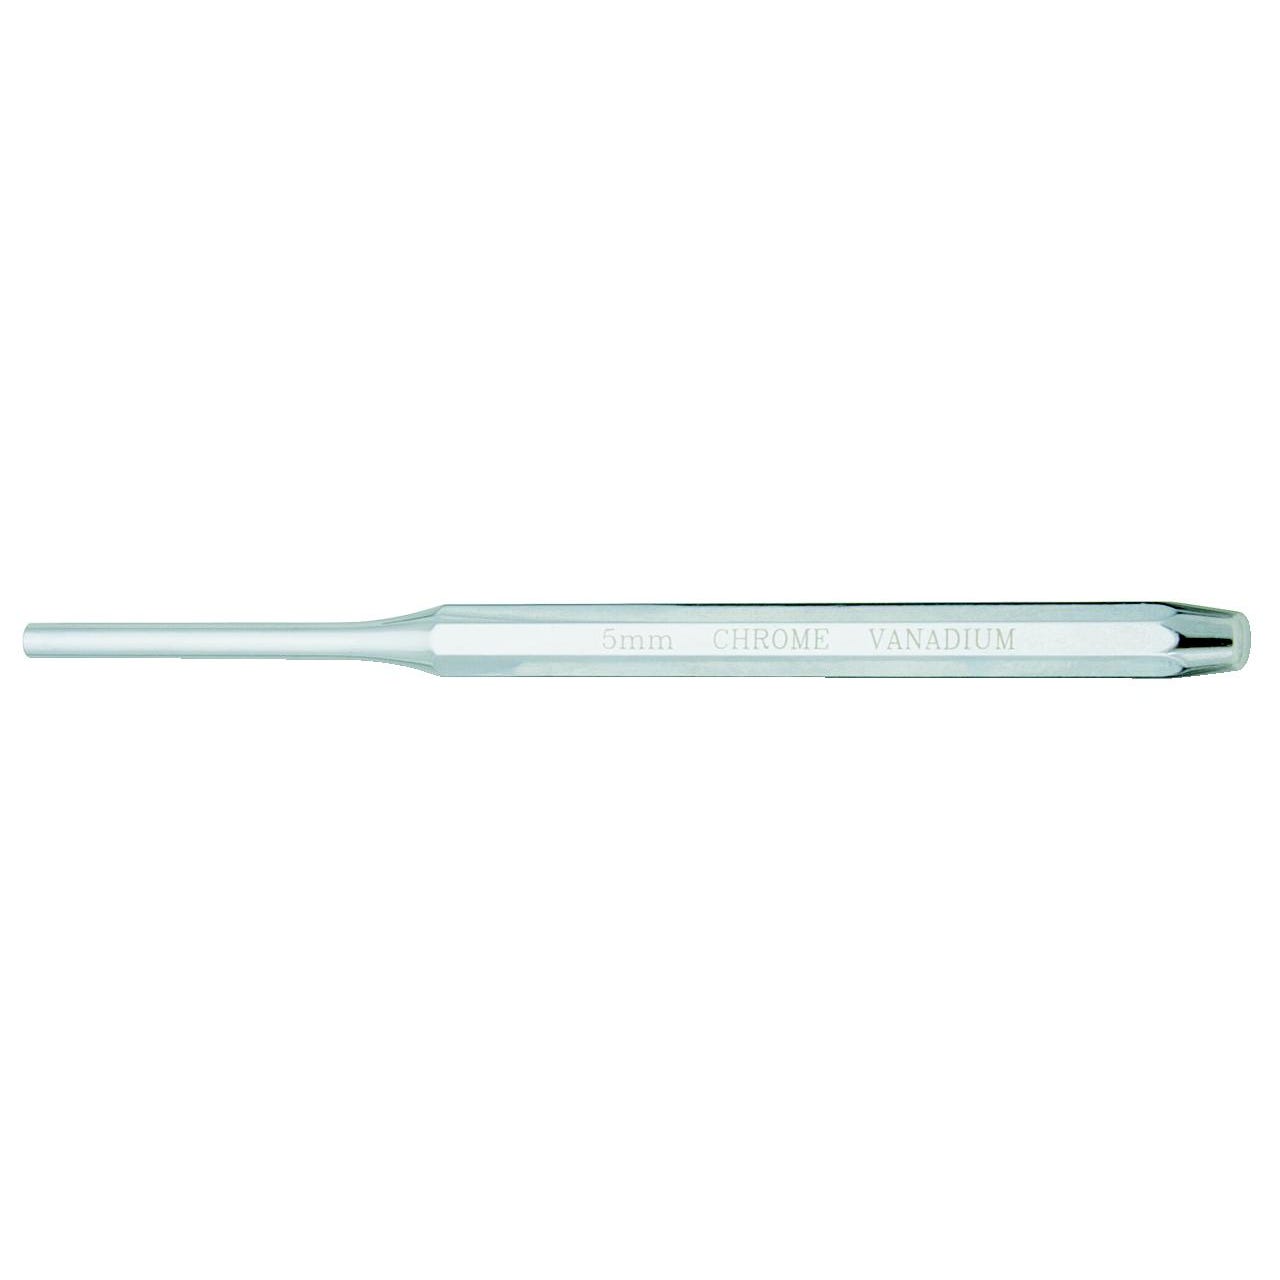 Chasse goupille cylindrique 8mm - longueur 180mm 3